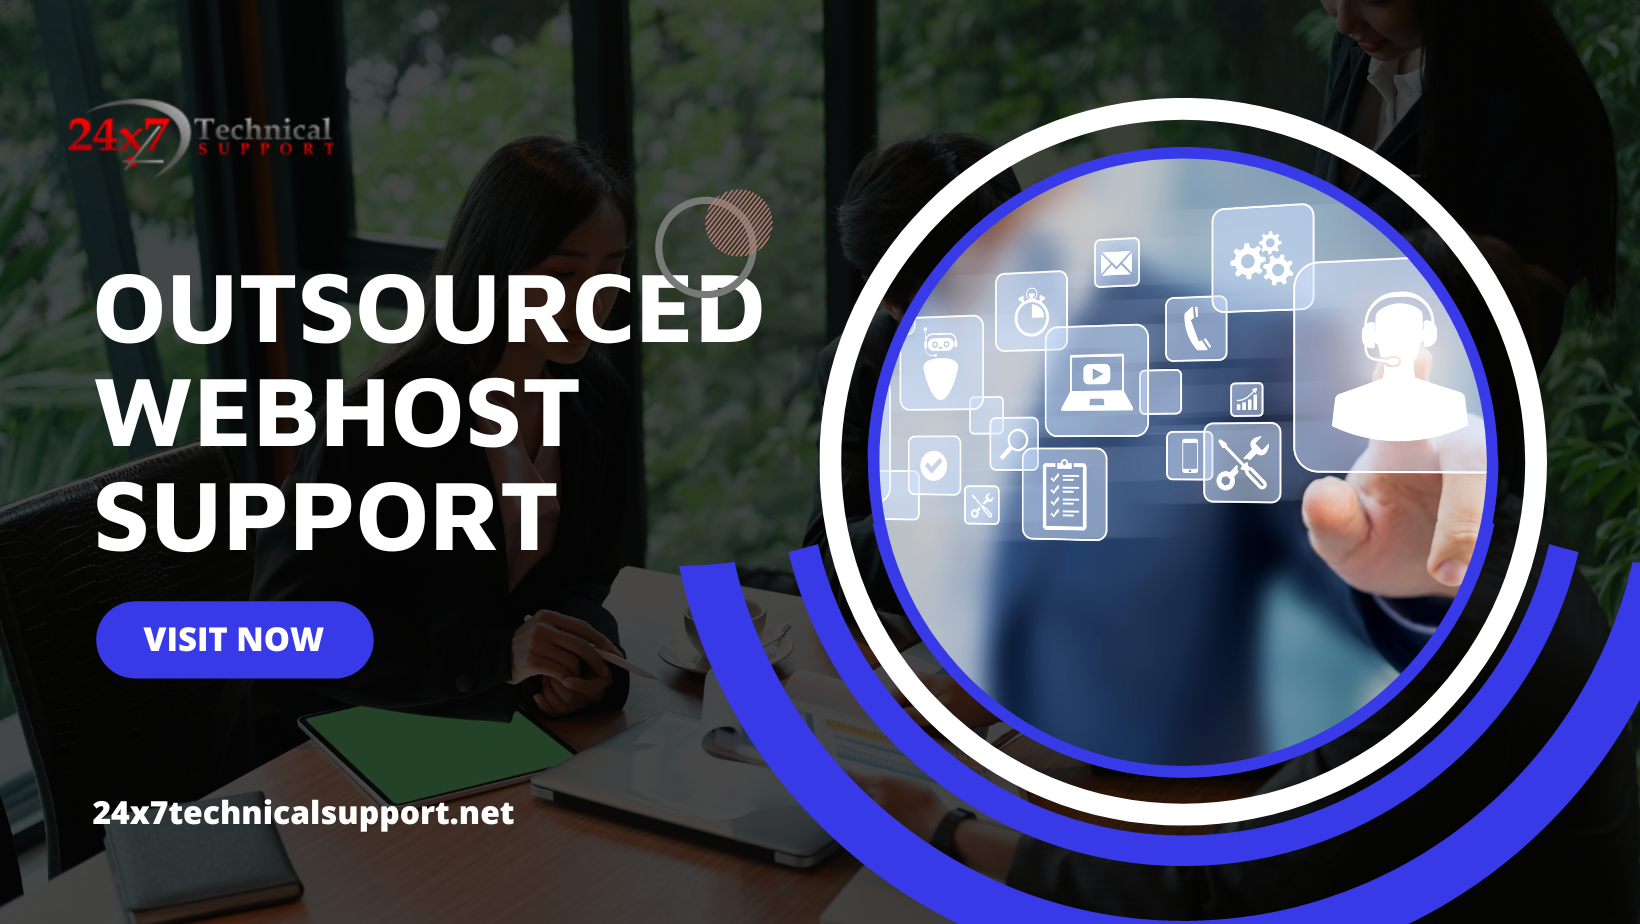 Outsourced Webhost Support